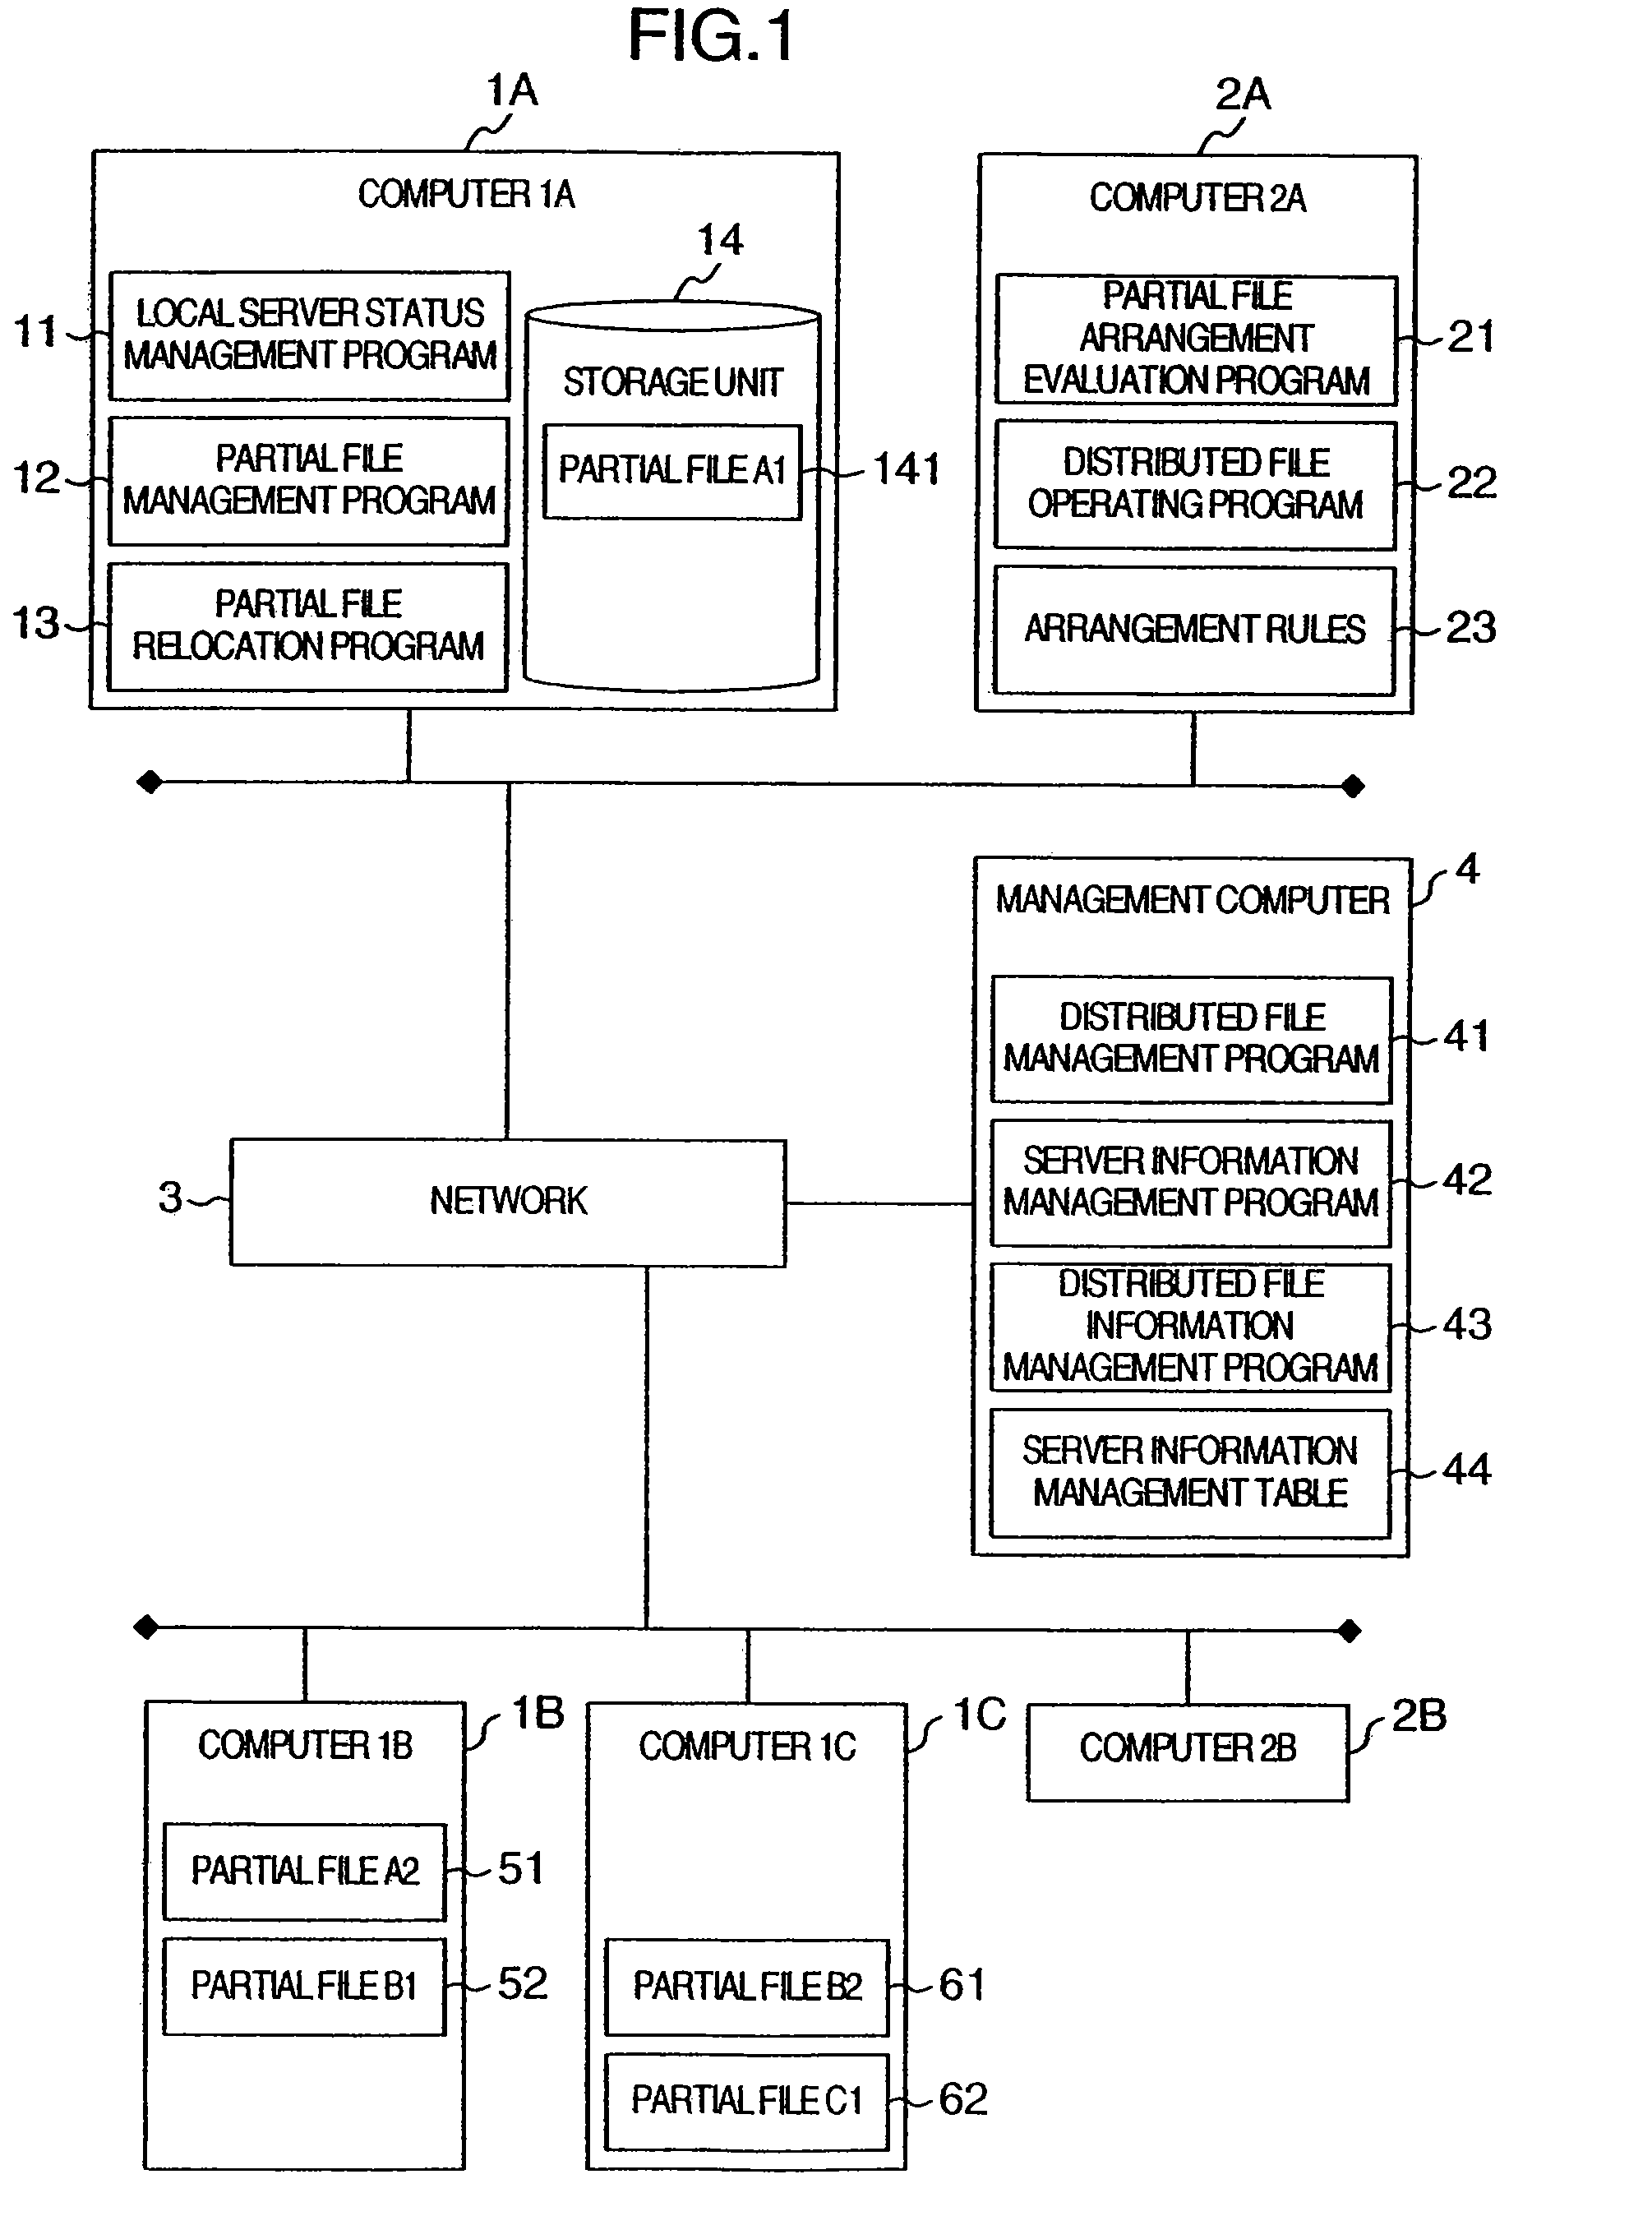 File distribution system in which partial files are arranged according to various allocation rules associated with a plurality of file types